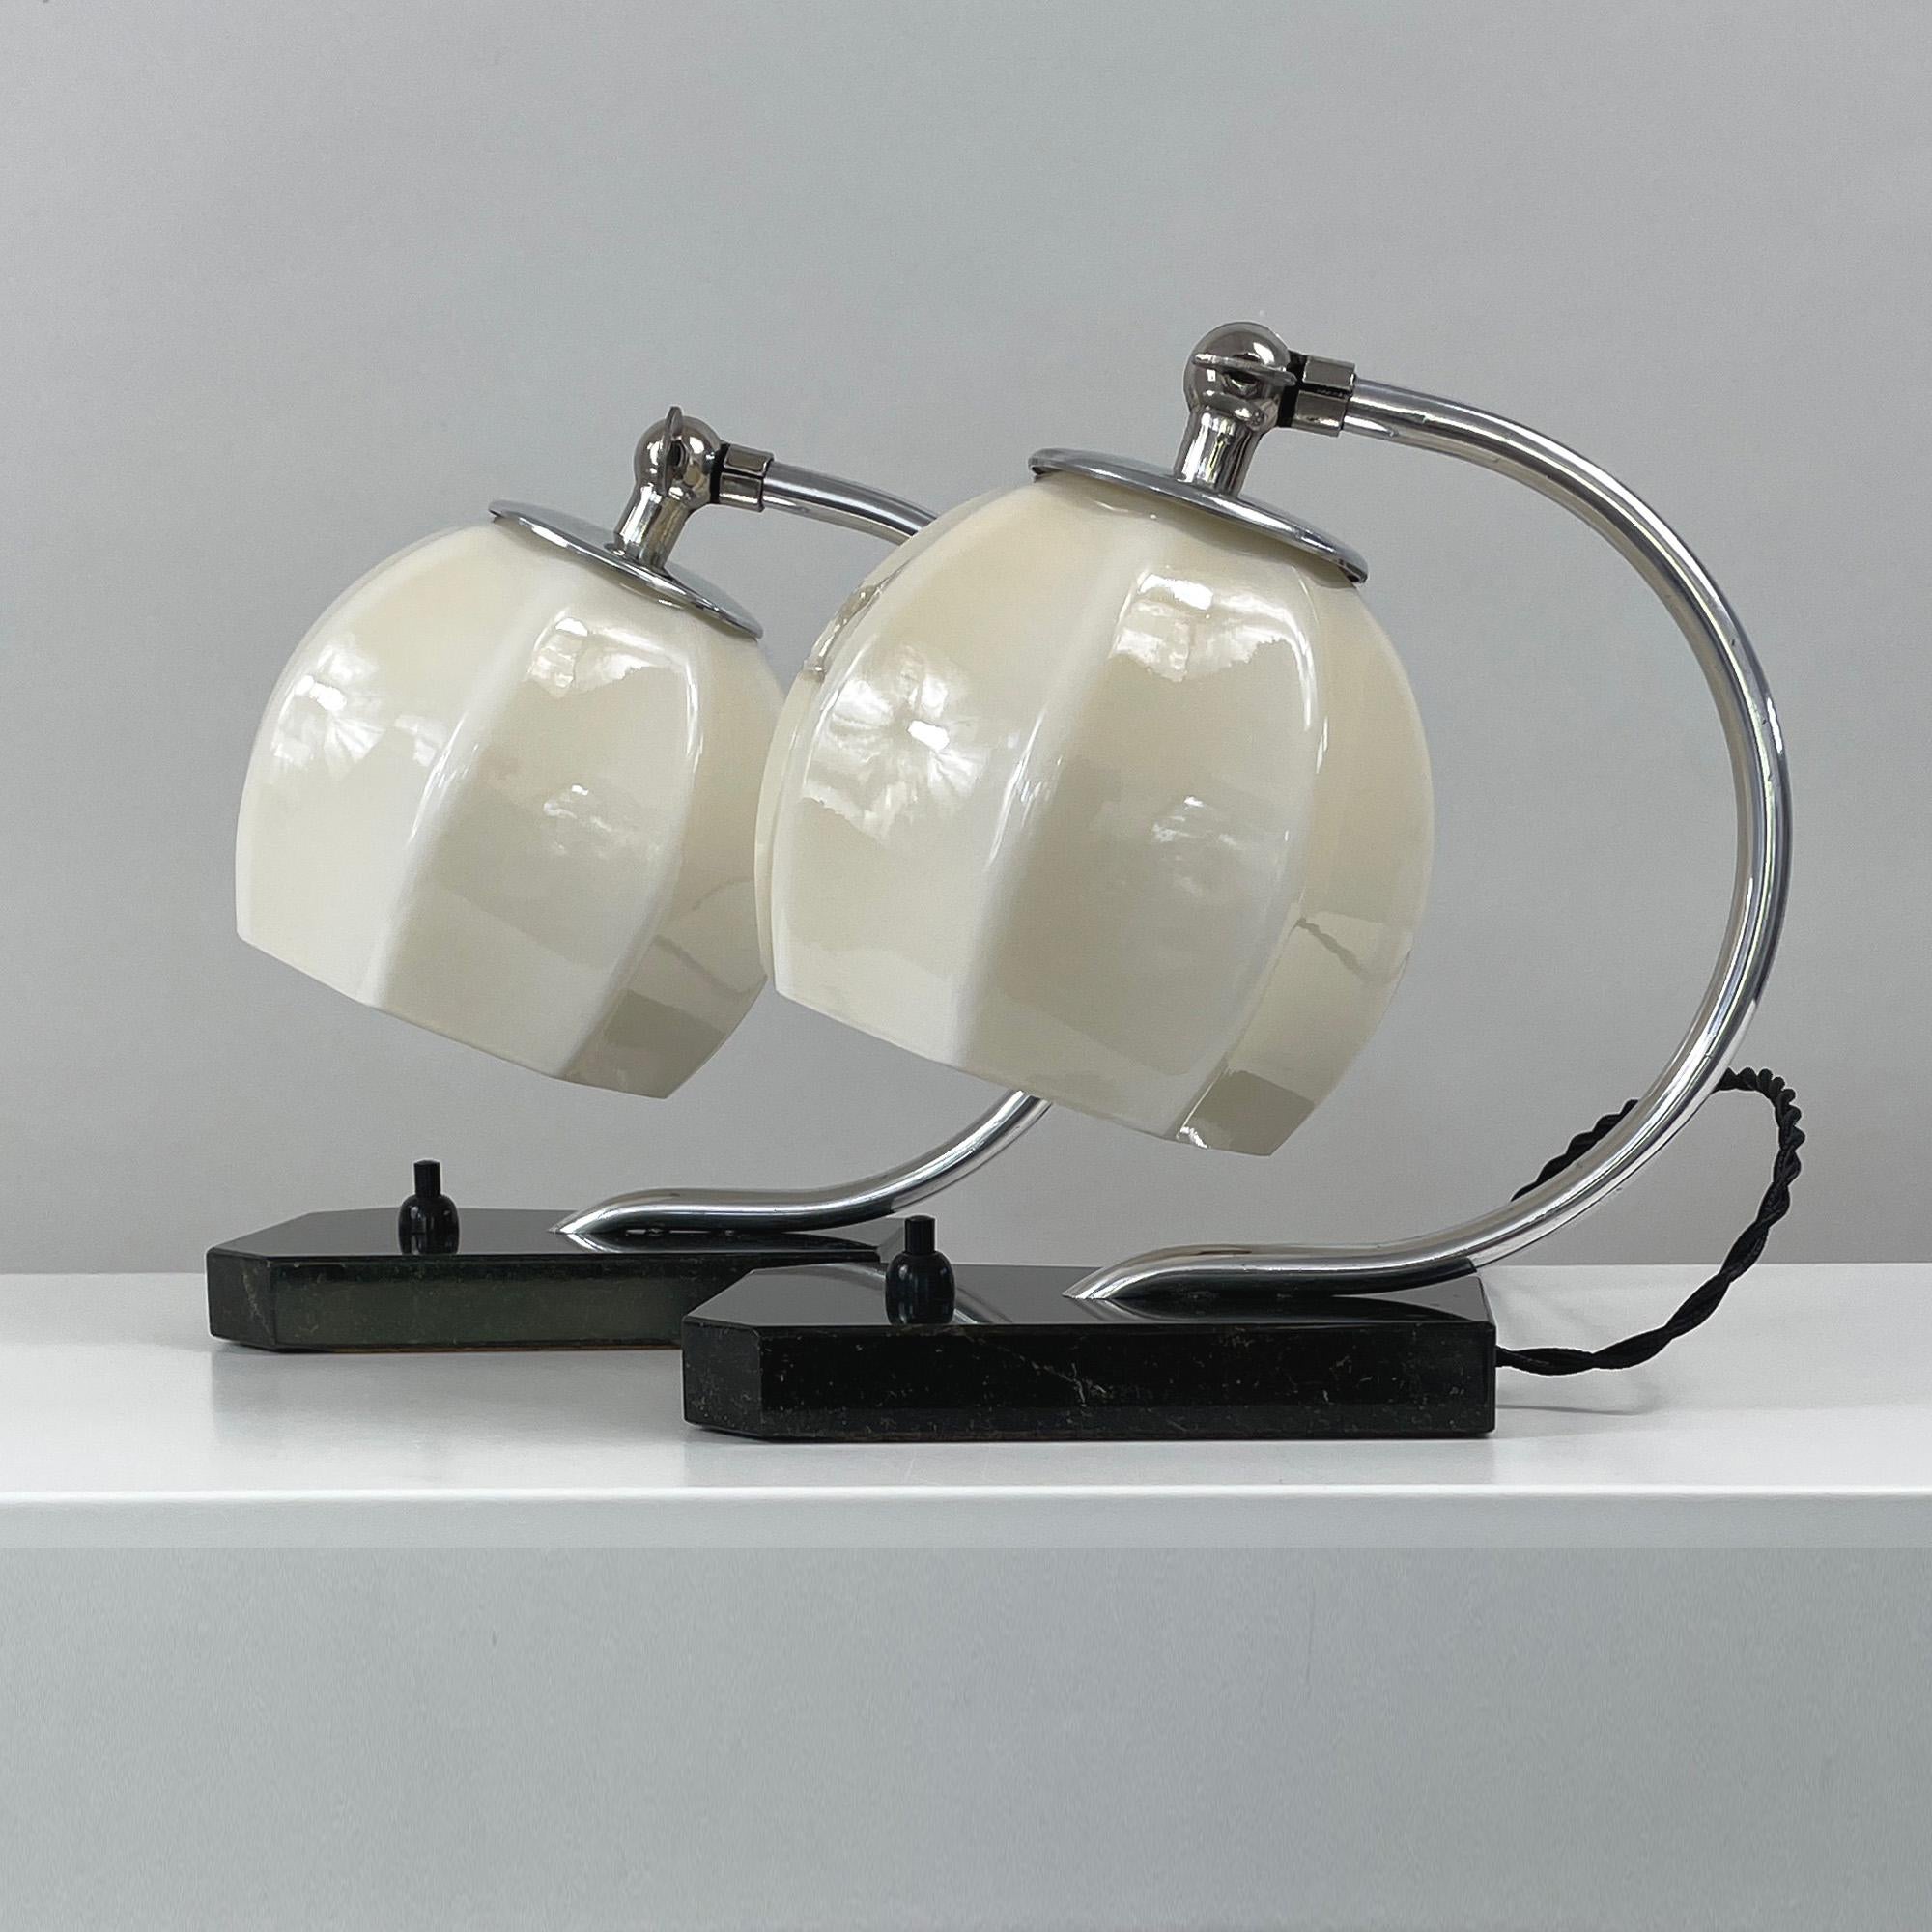 These unusual table or bedside lamps were designed and manufactured in Germany in the 1930s during the Art Deco / Bauhaus period. They feature black marble bases, aluminum lamp arms and cream colored opaline lampshades. The lamps shades are